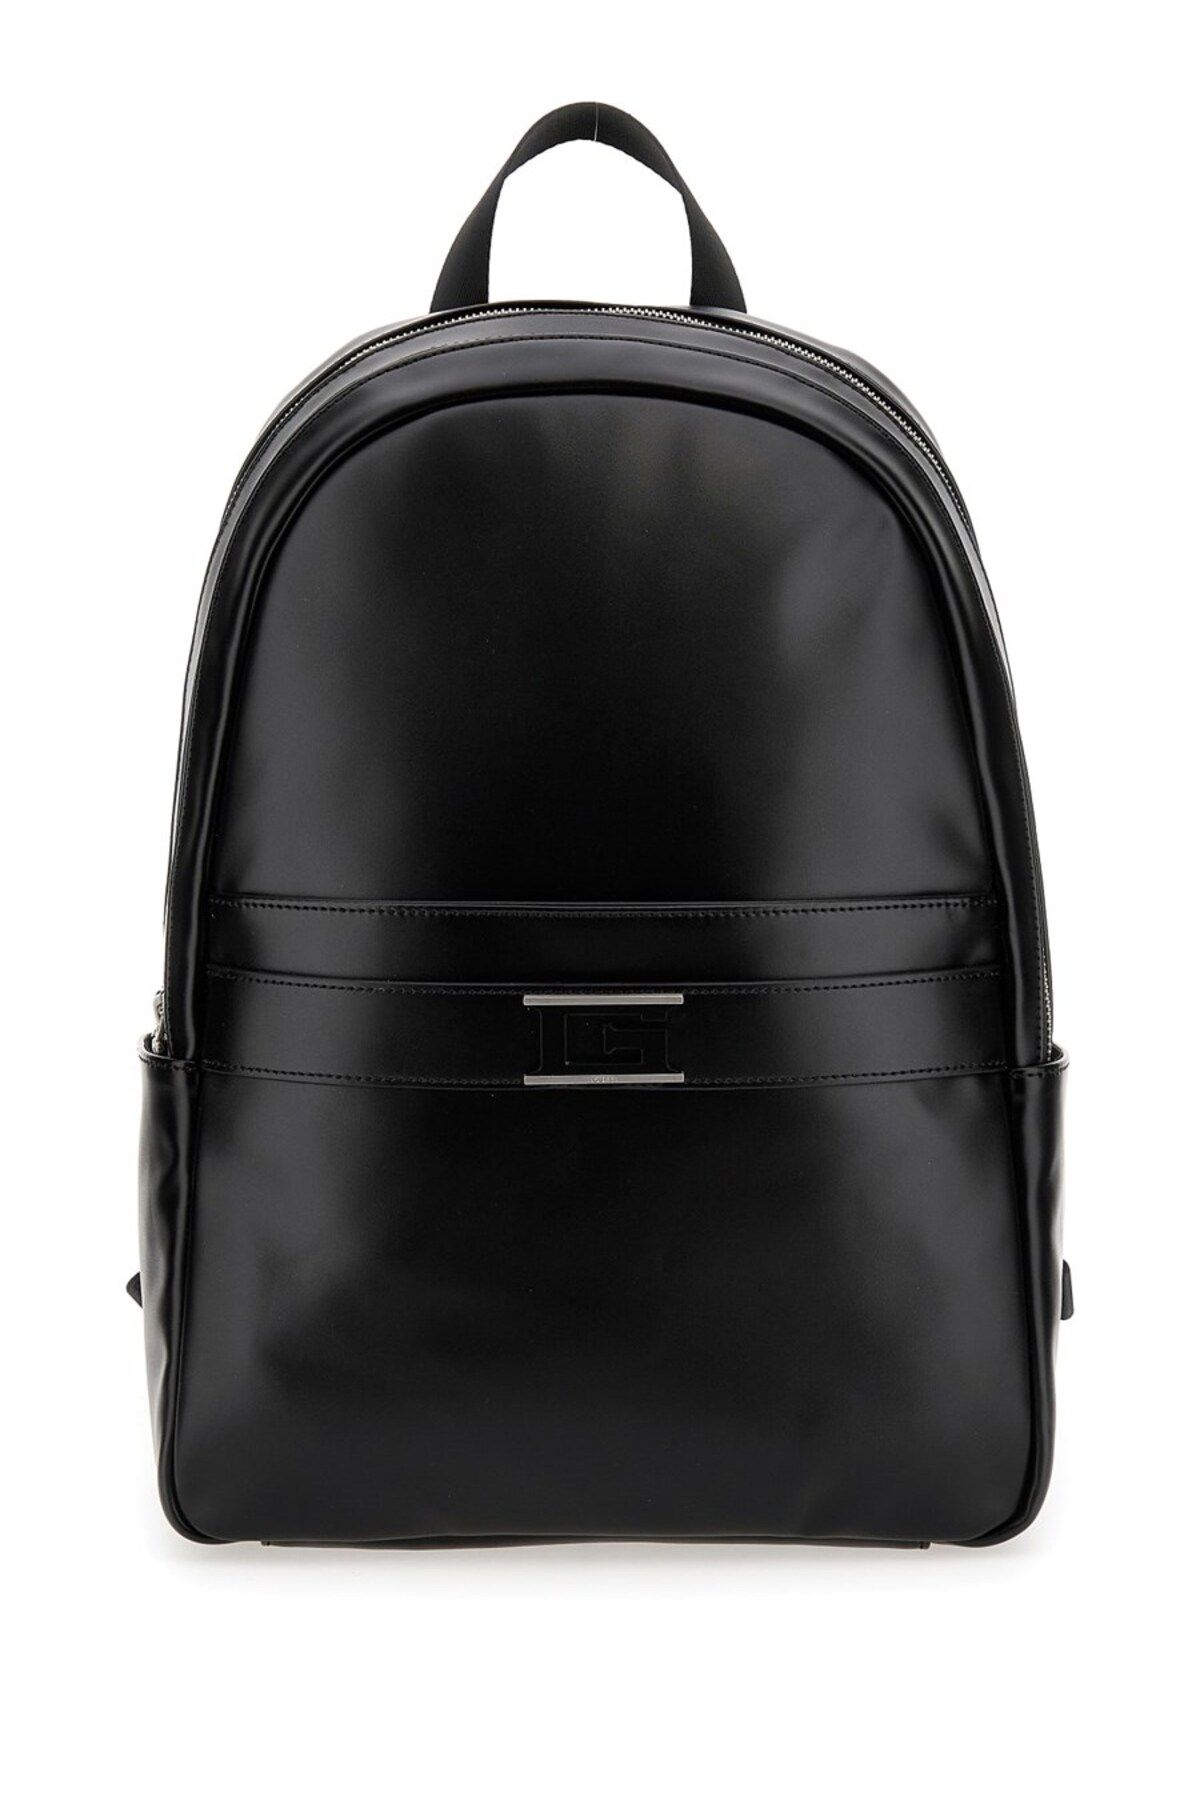 Guess FORTE BACKPACK